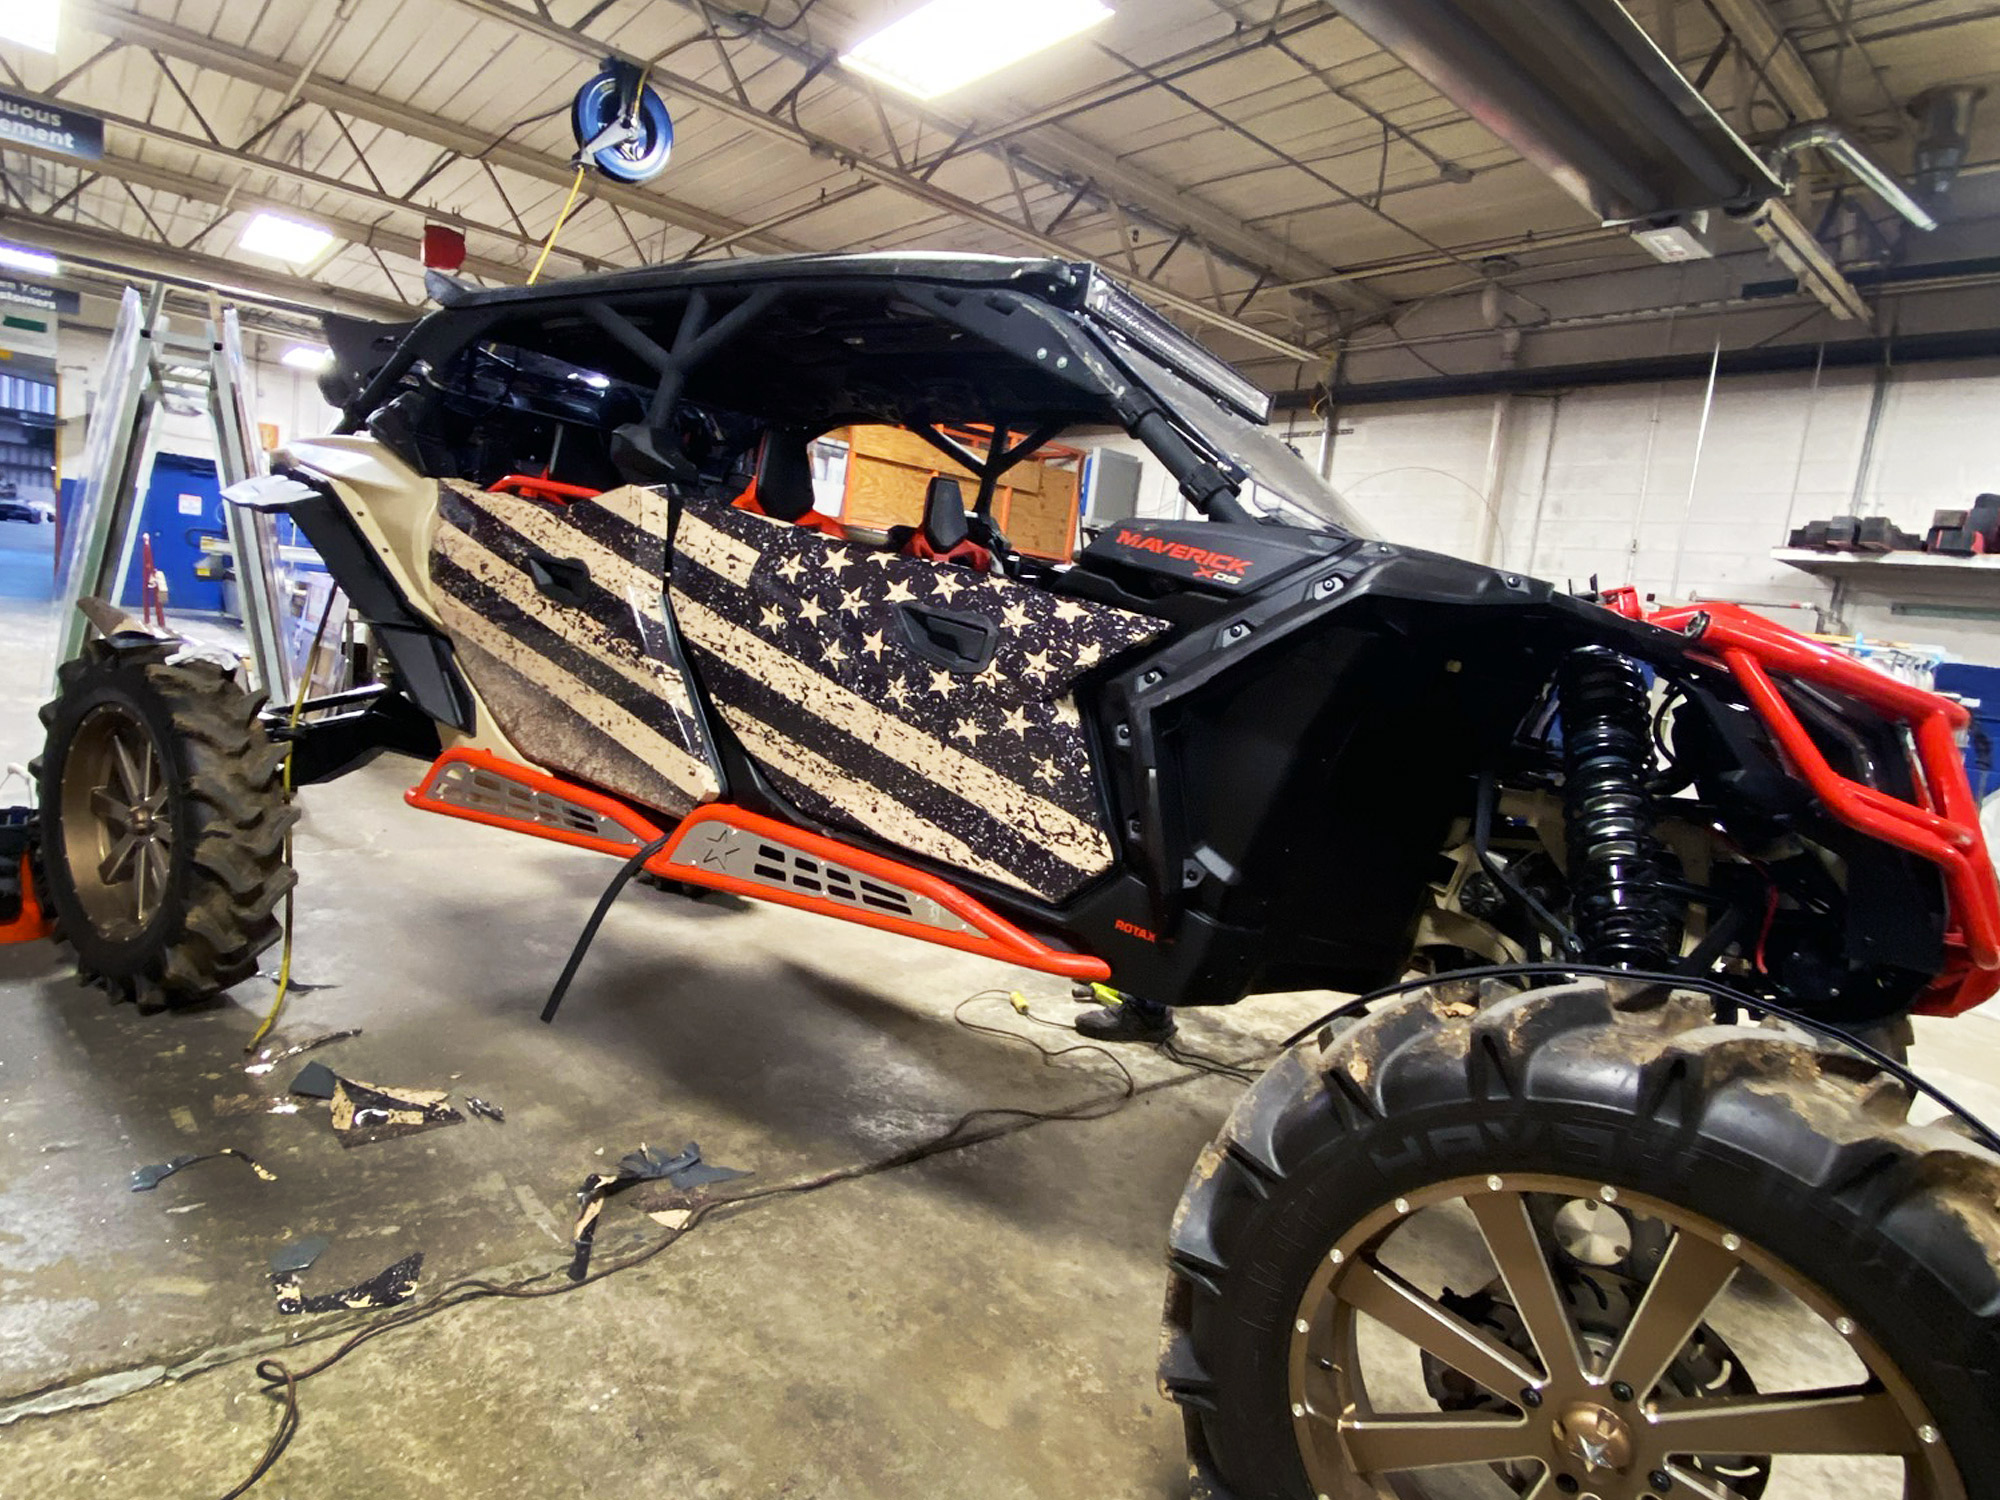 Partial wrap with American flag on an off-road 4WD vehicle.